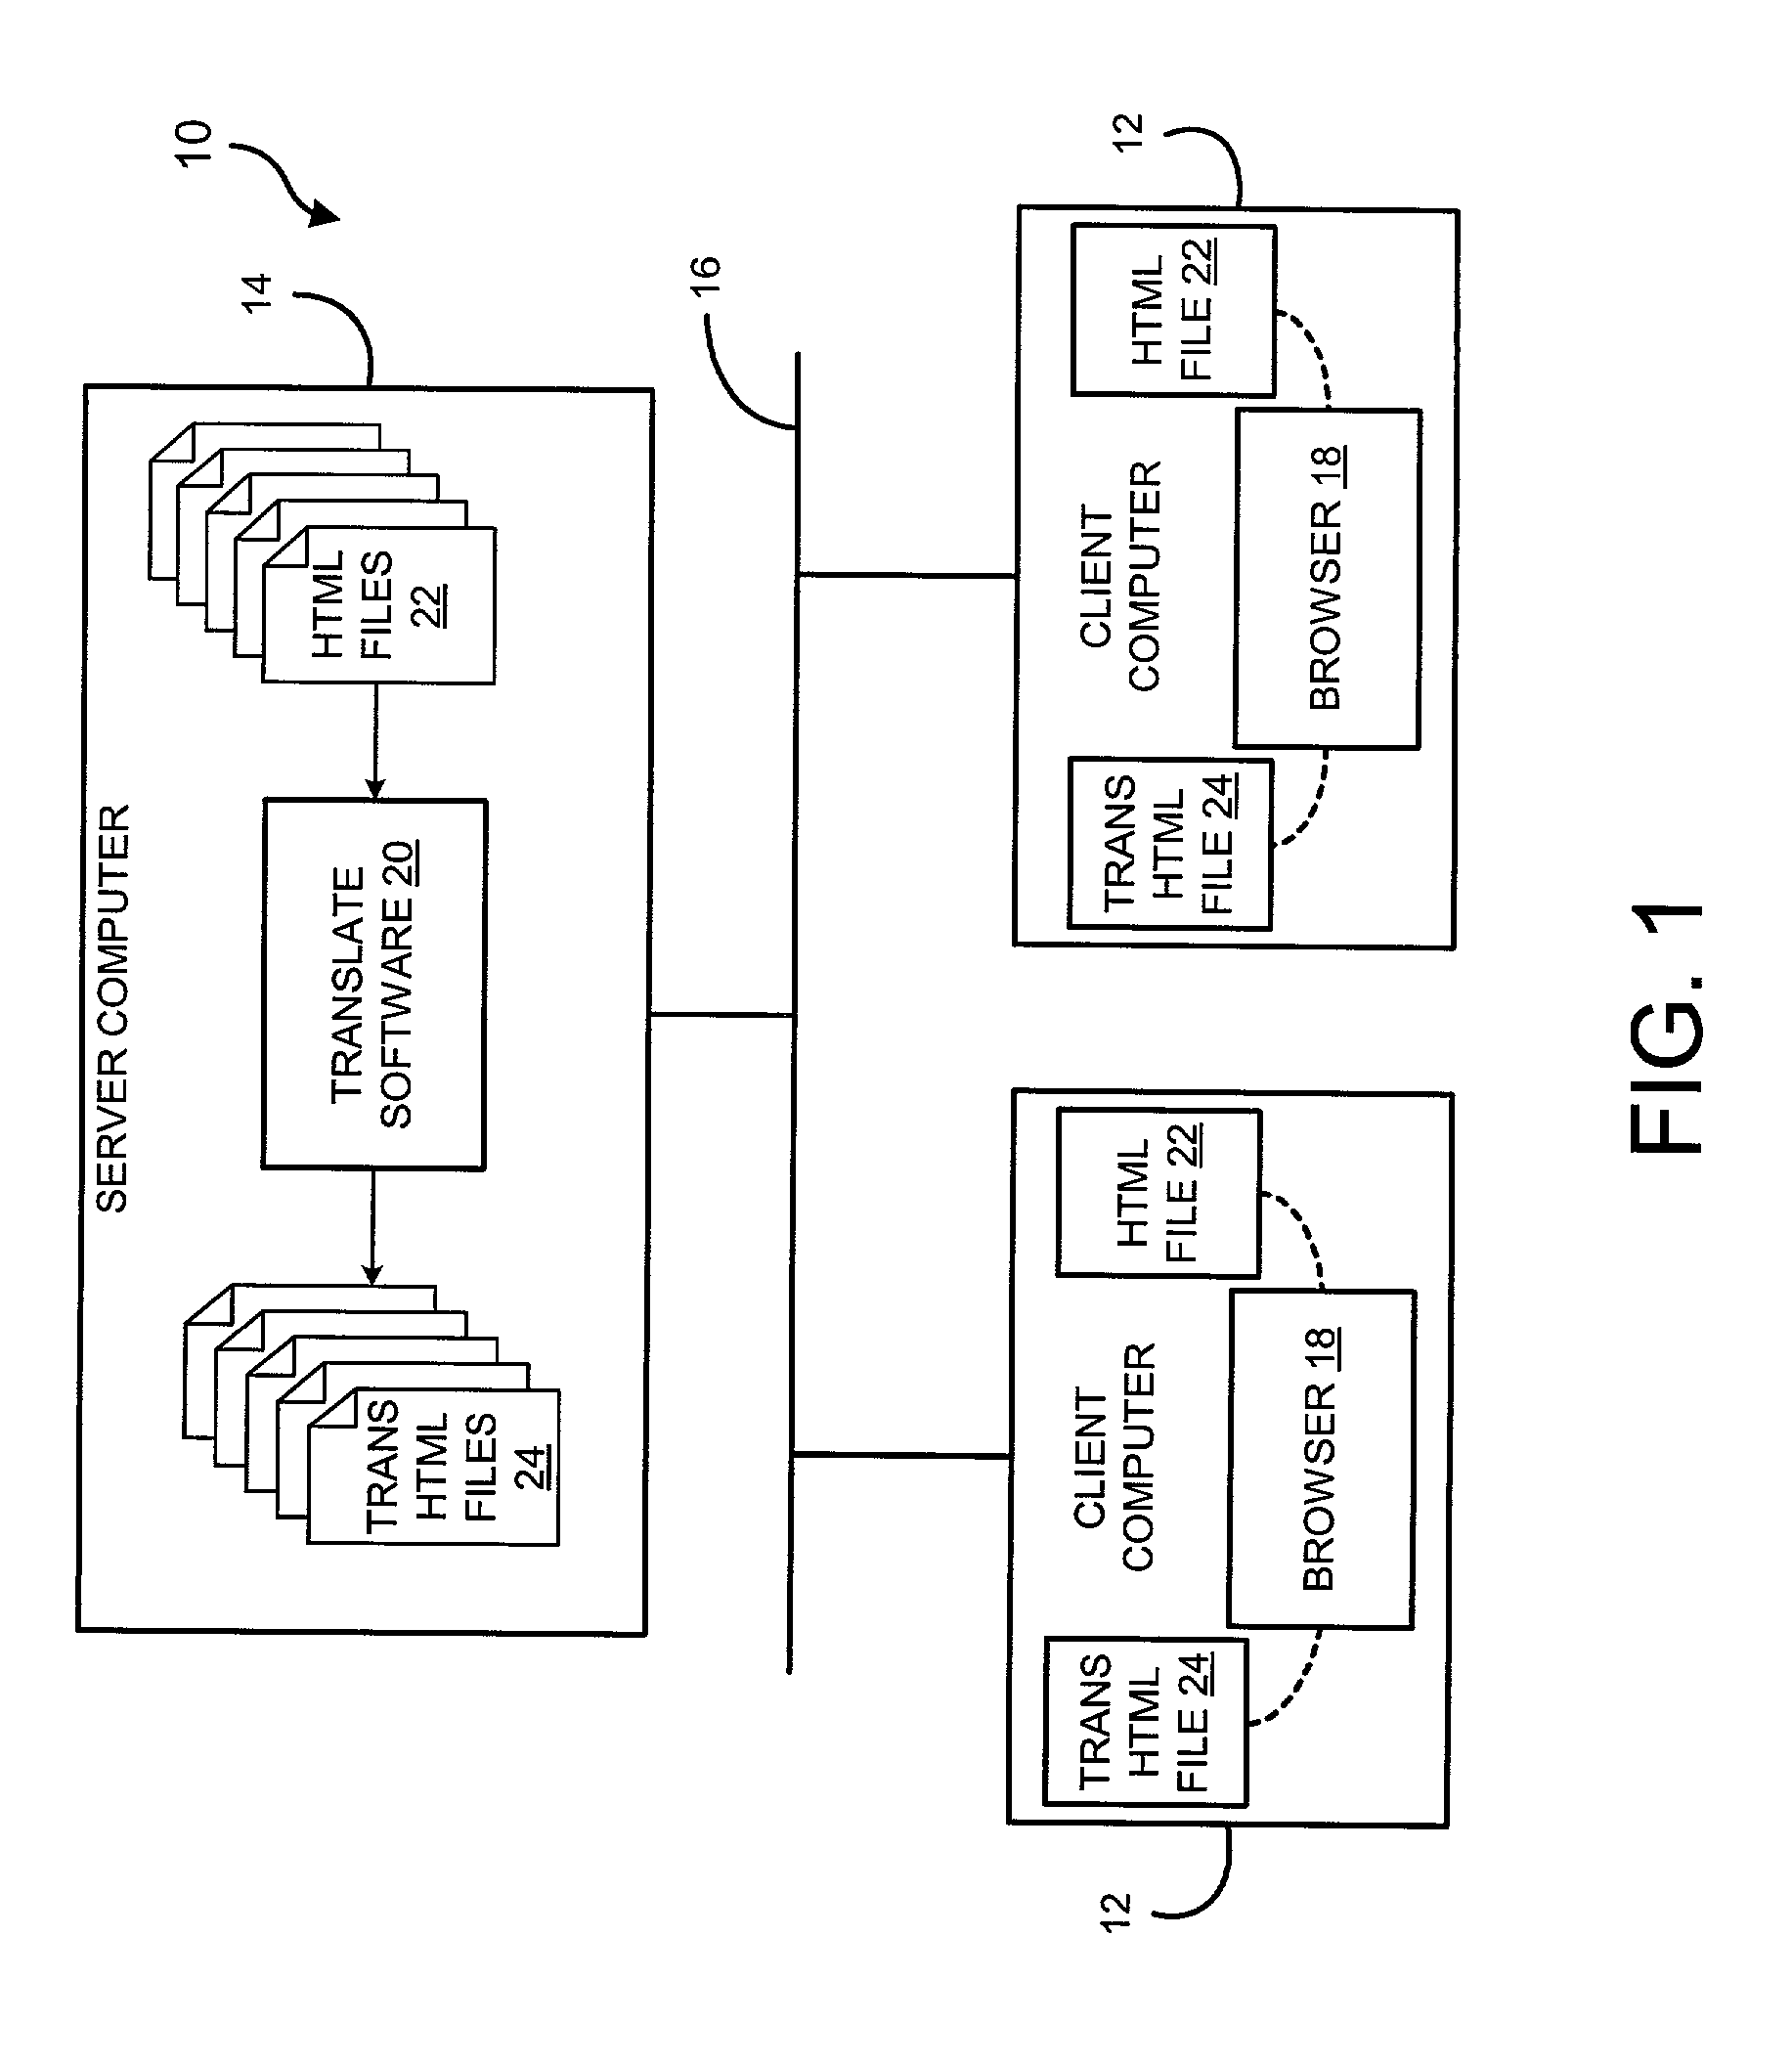 System and method for converting a standard generalized markup language in multiple languages